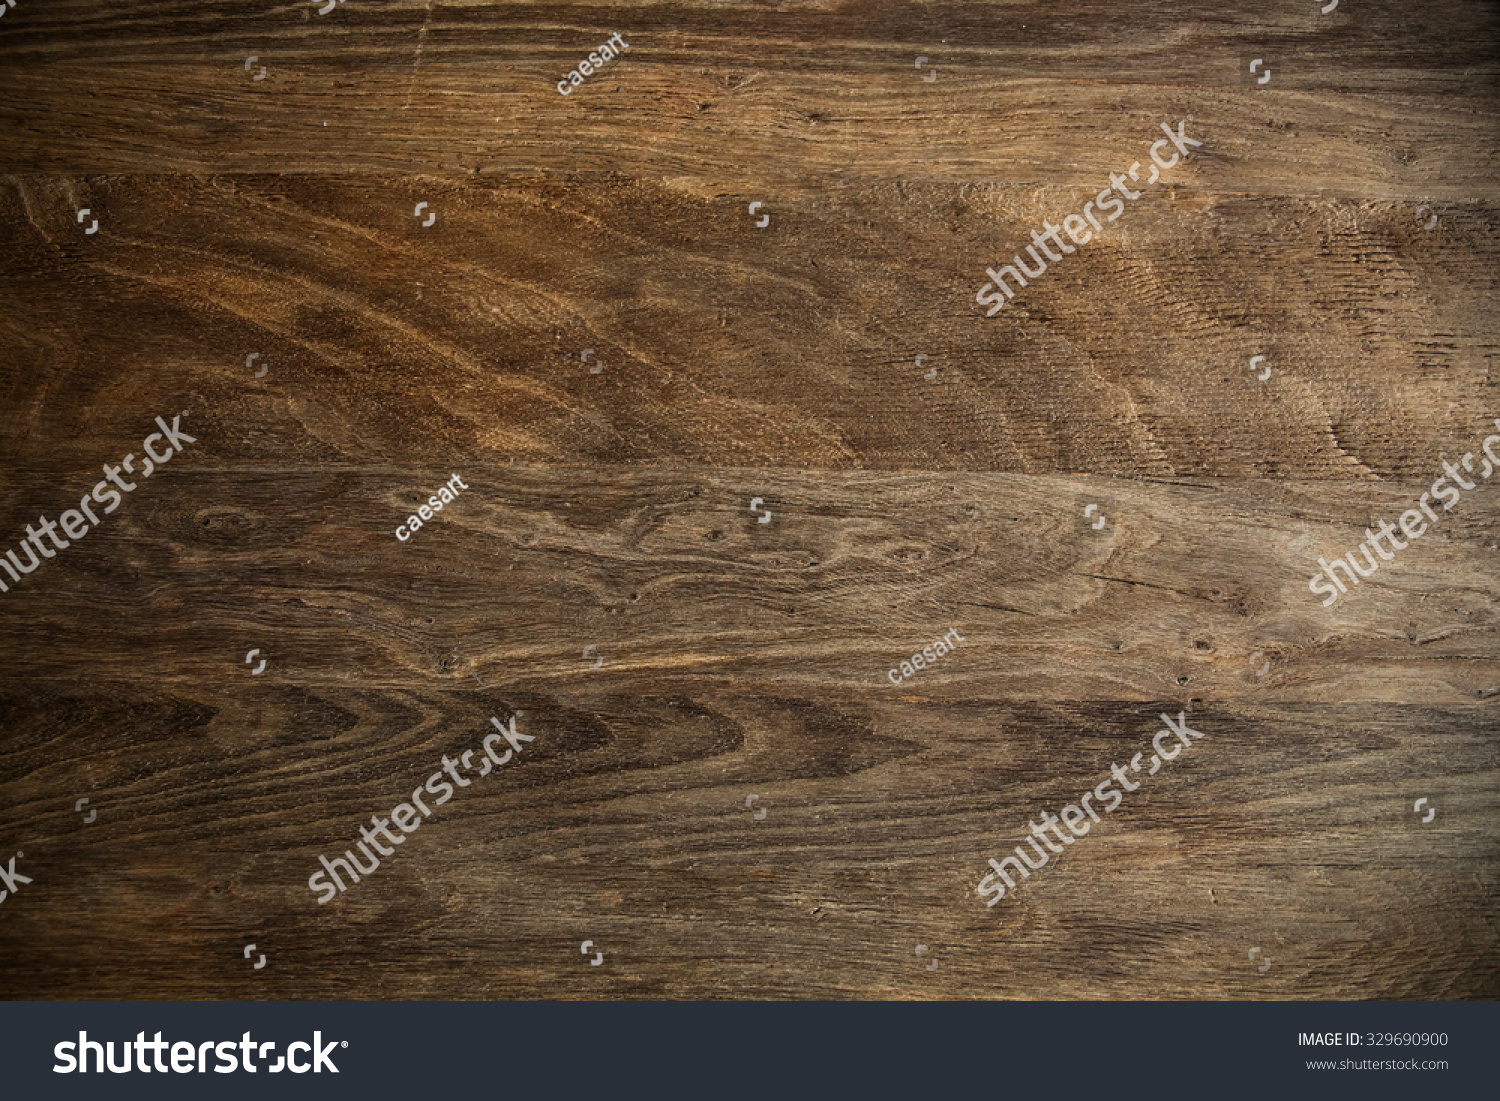 Old Vintage Wood Texture For Background Stock Photo 329690900